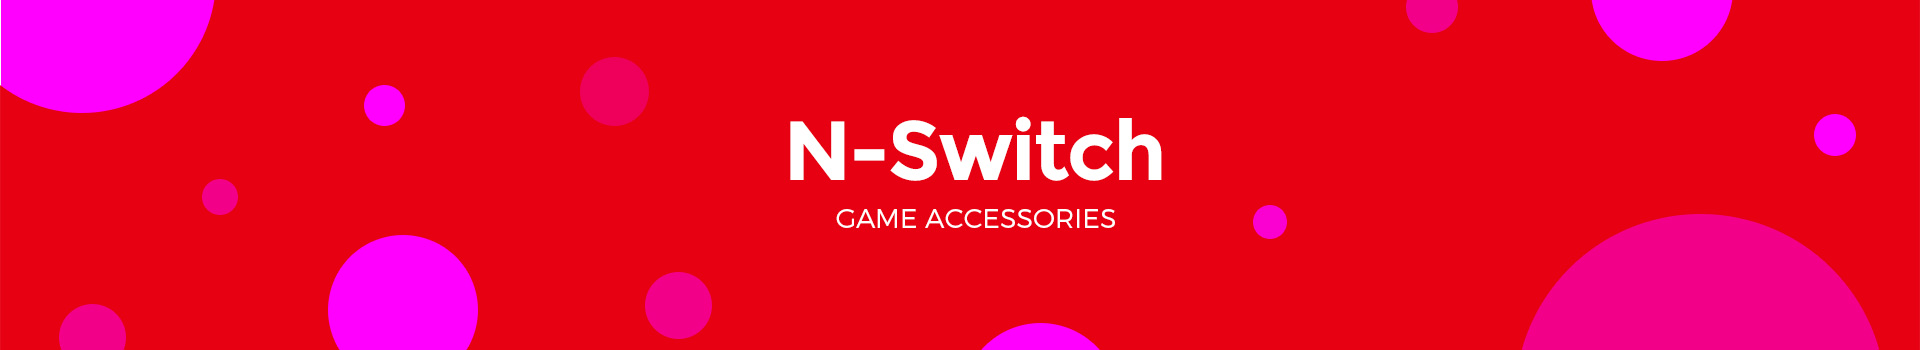 N-Switch Game Accessories